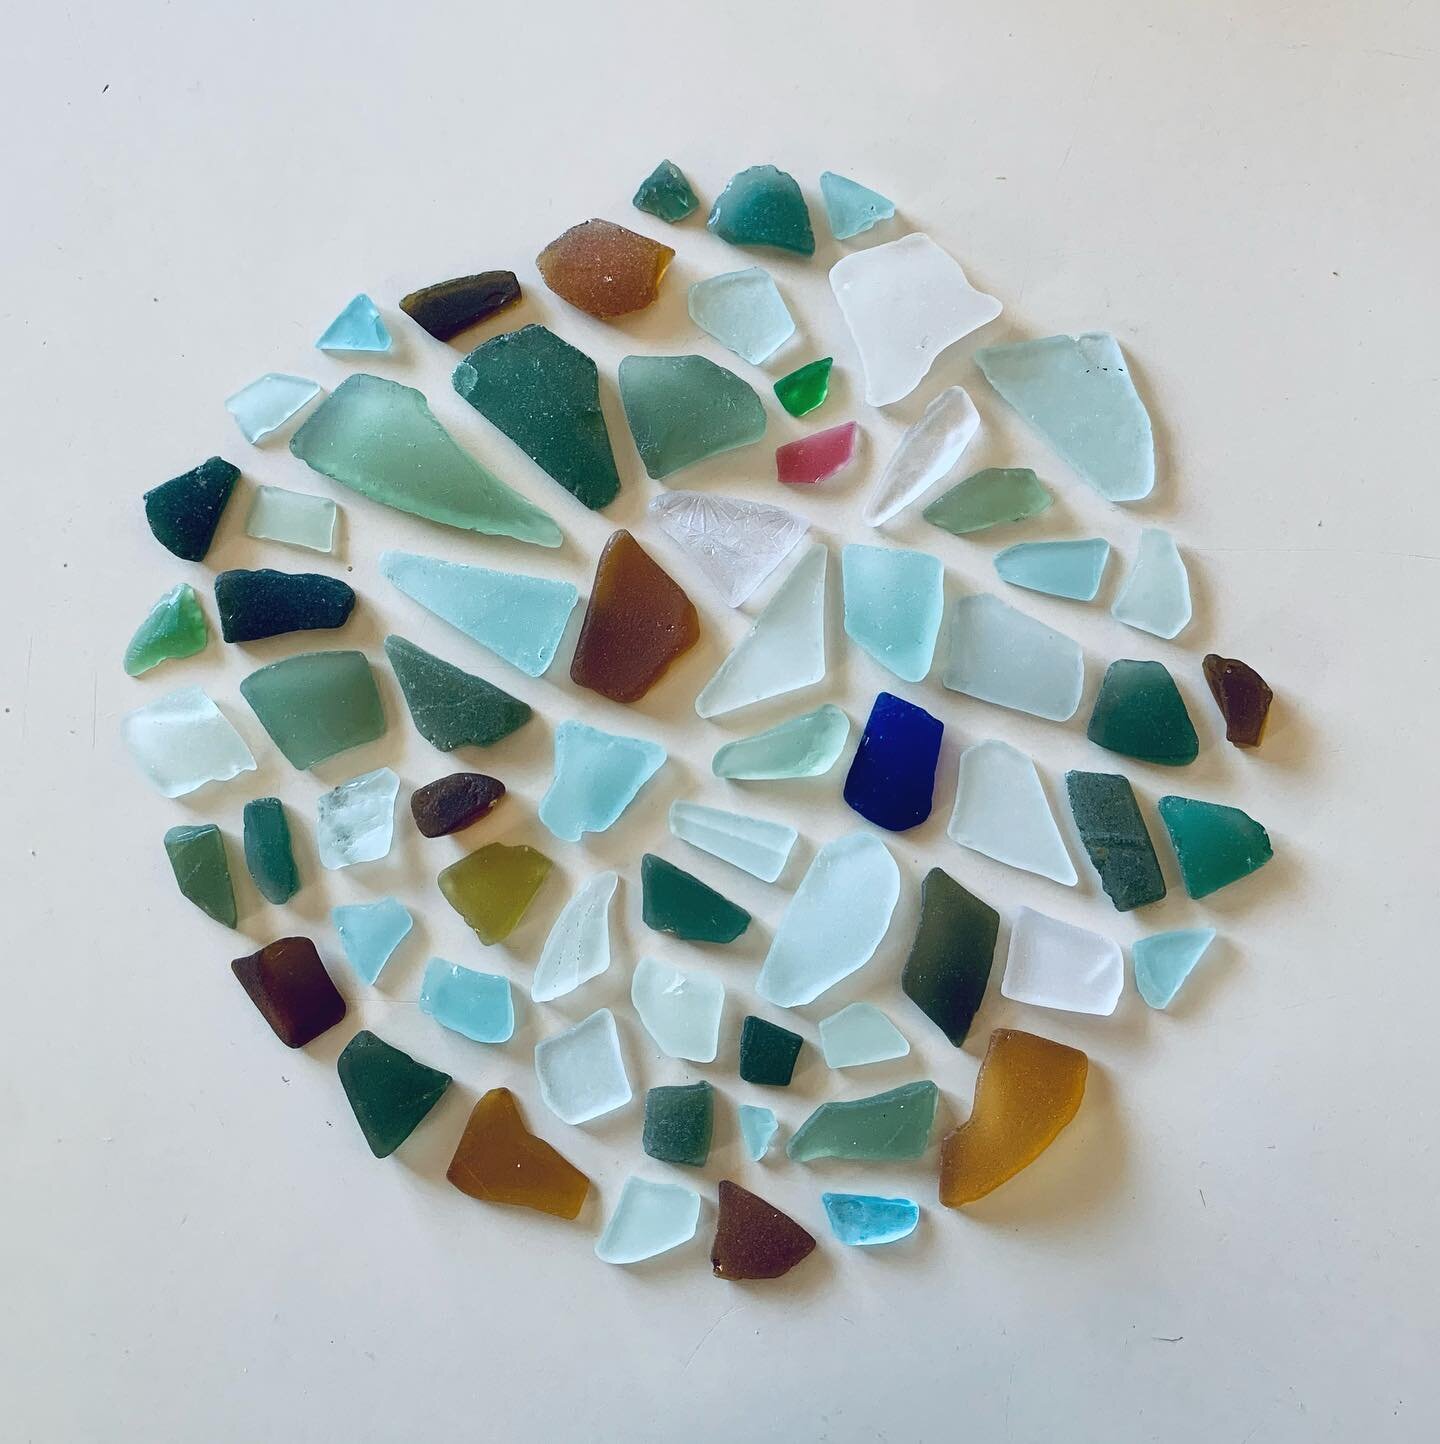 Ariel was a mermaid
and a hoarder
And so am I it seems
My home is filled with treasures
gifted by the sea
Shells and tumbled sea glass
line my window sills
Walking the shore in search of them
helps my mind to be still
Pieces of broken dinner plate
ro